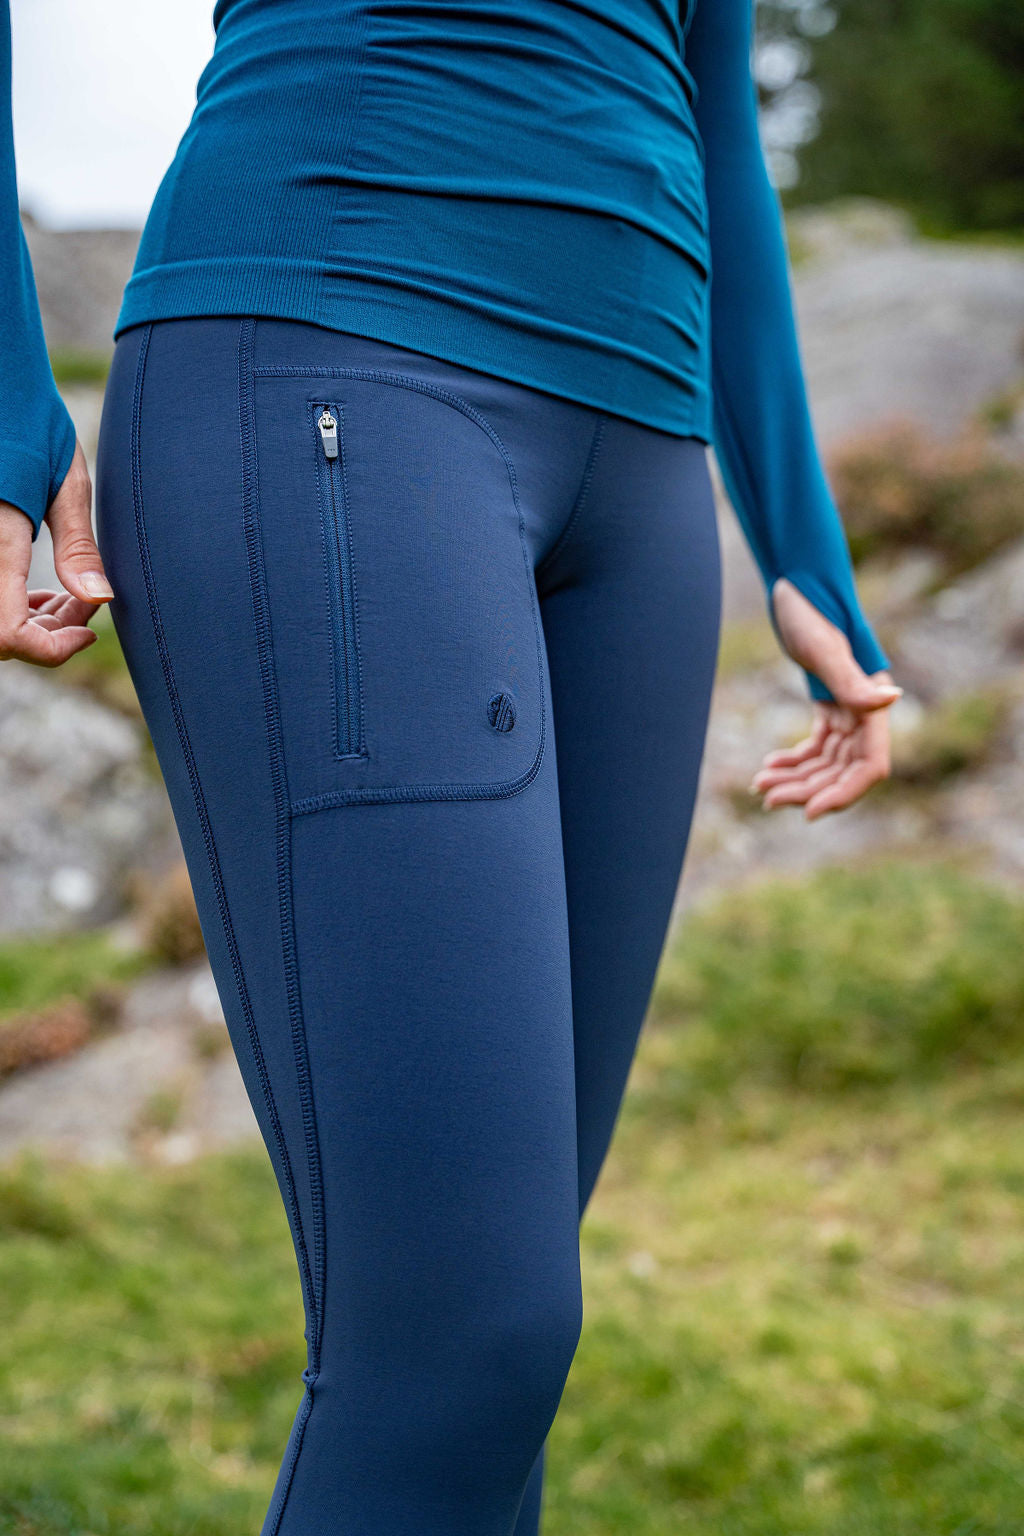 ACAI Outdoorwear - Our stylish, high performance Outdoor Softshell Leggings  are running out of our warehouse at top speed! Moisture wicking,  breathable, shower resistant, high waisted and fitted with a secure draw